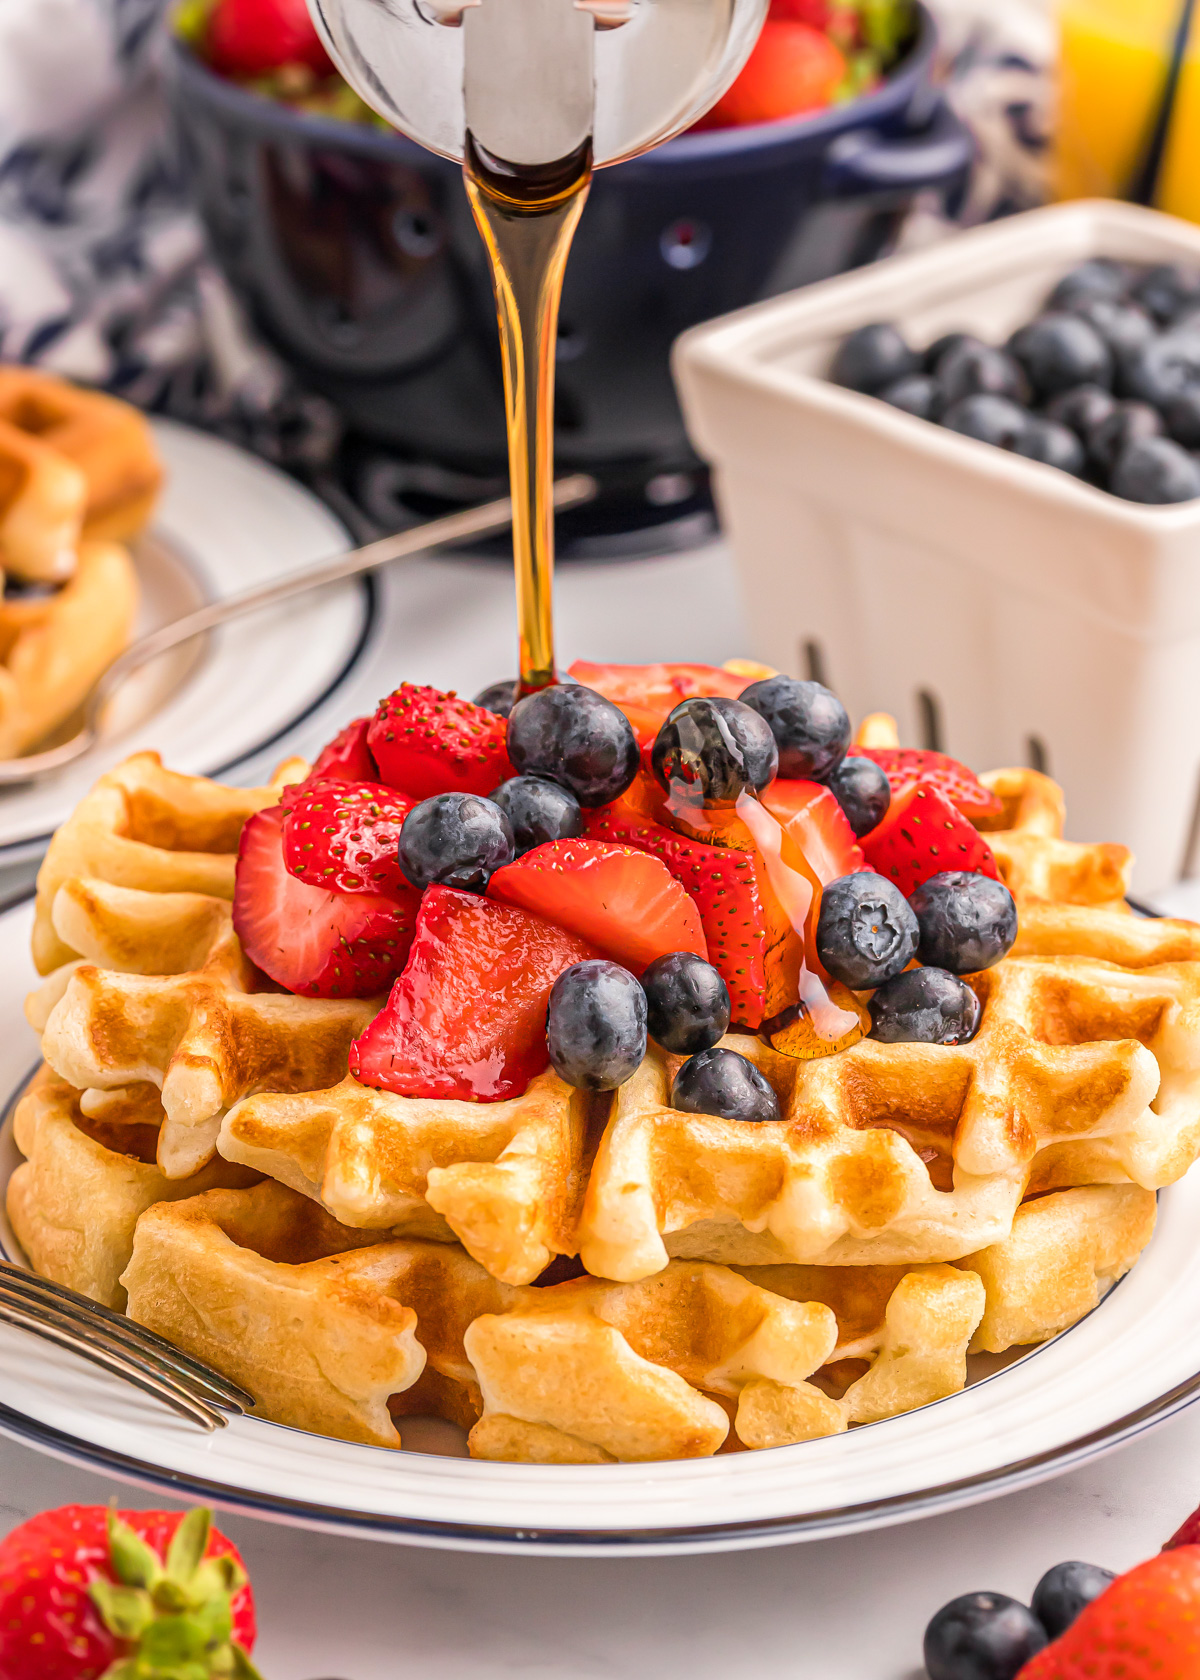 Pouring syrup on a Bisquick waffle recipe topped with berries.